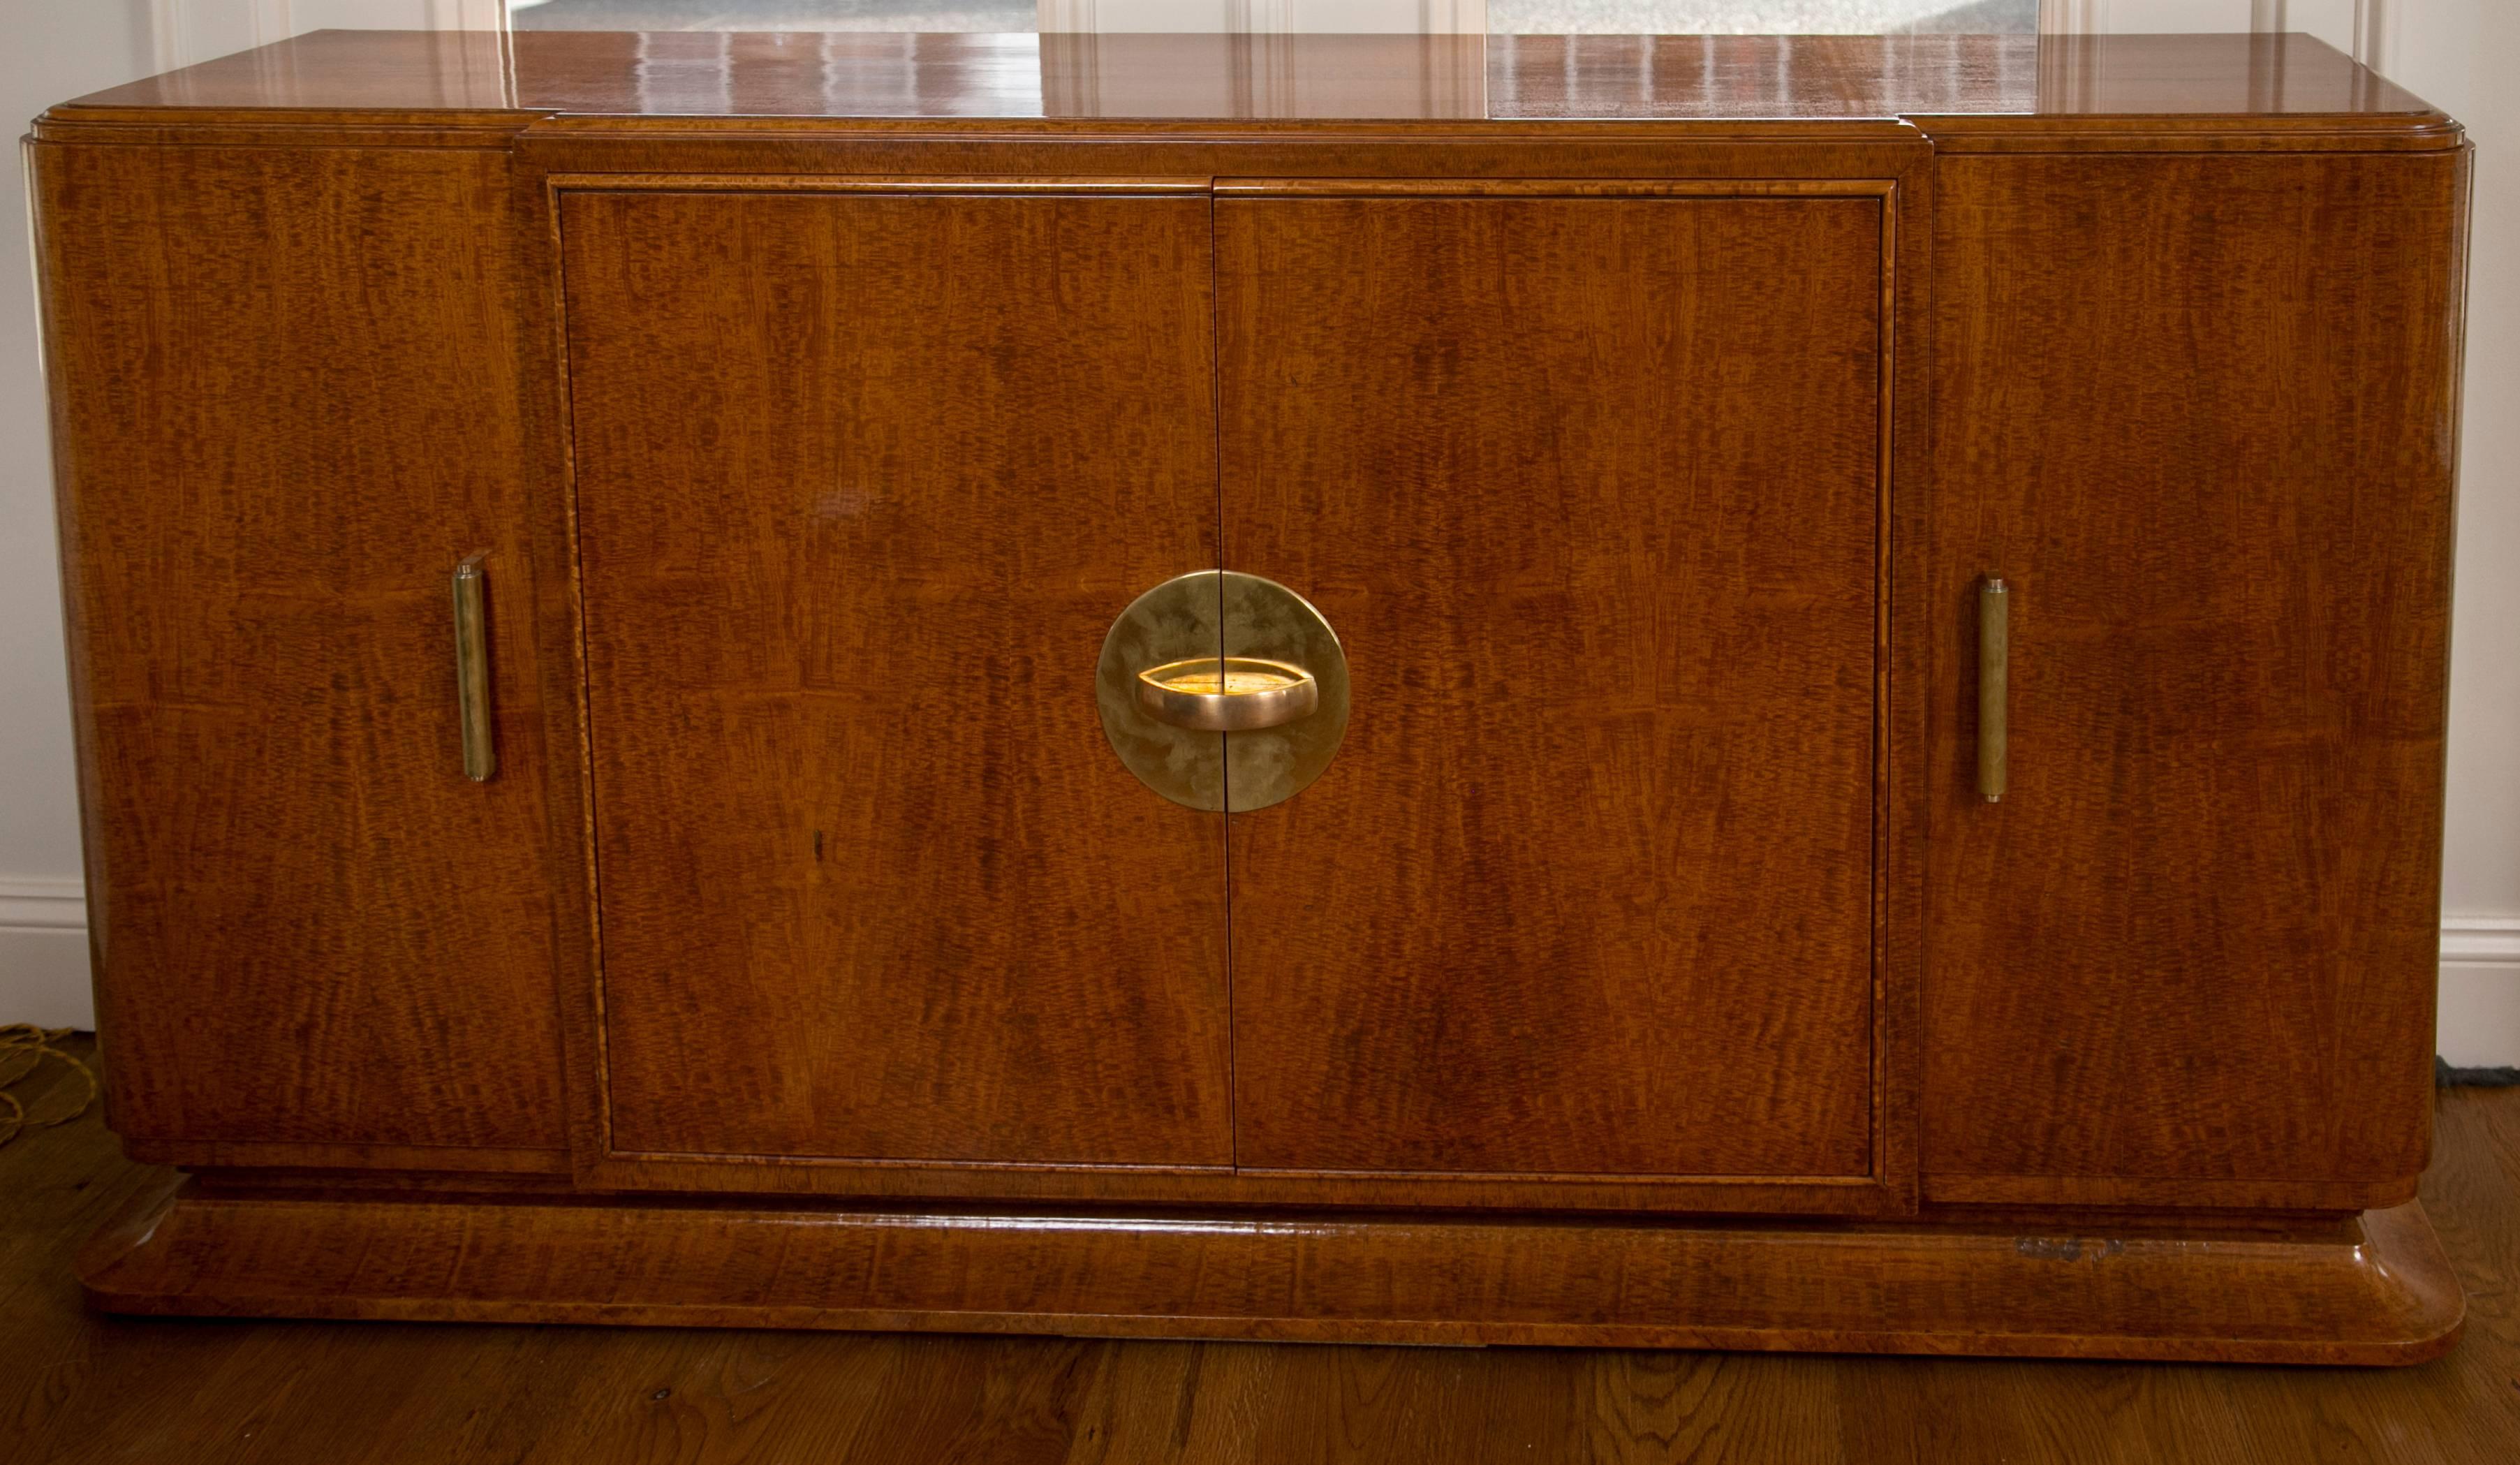 Beautiful French art moderne sideboard in quartered blonde amboyna veneer comprised of rounded corners and four doors opening to mahogany interior outfitted with shelves, adorned with solid brass bar pulls
Origin: French
Dating: circa